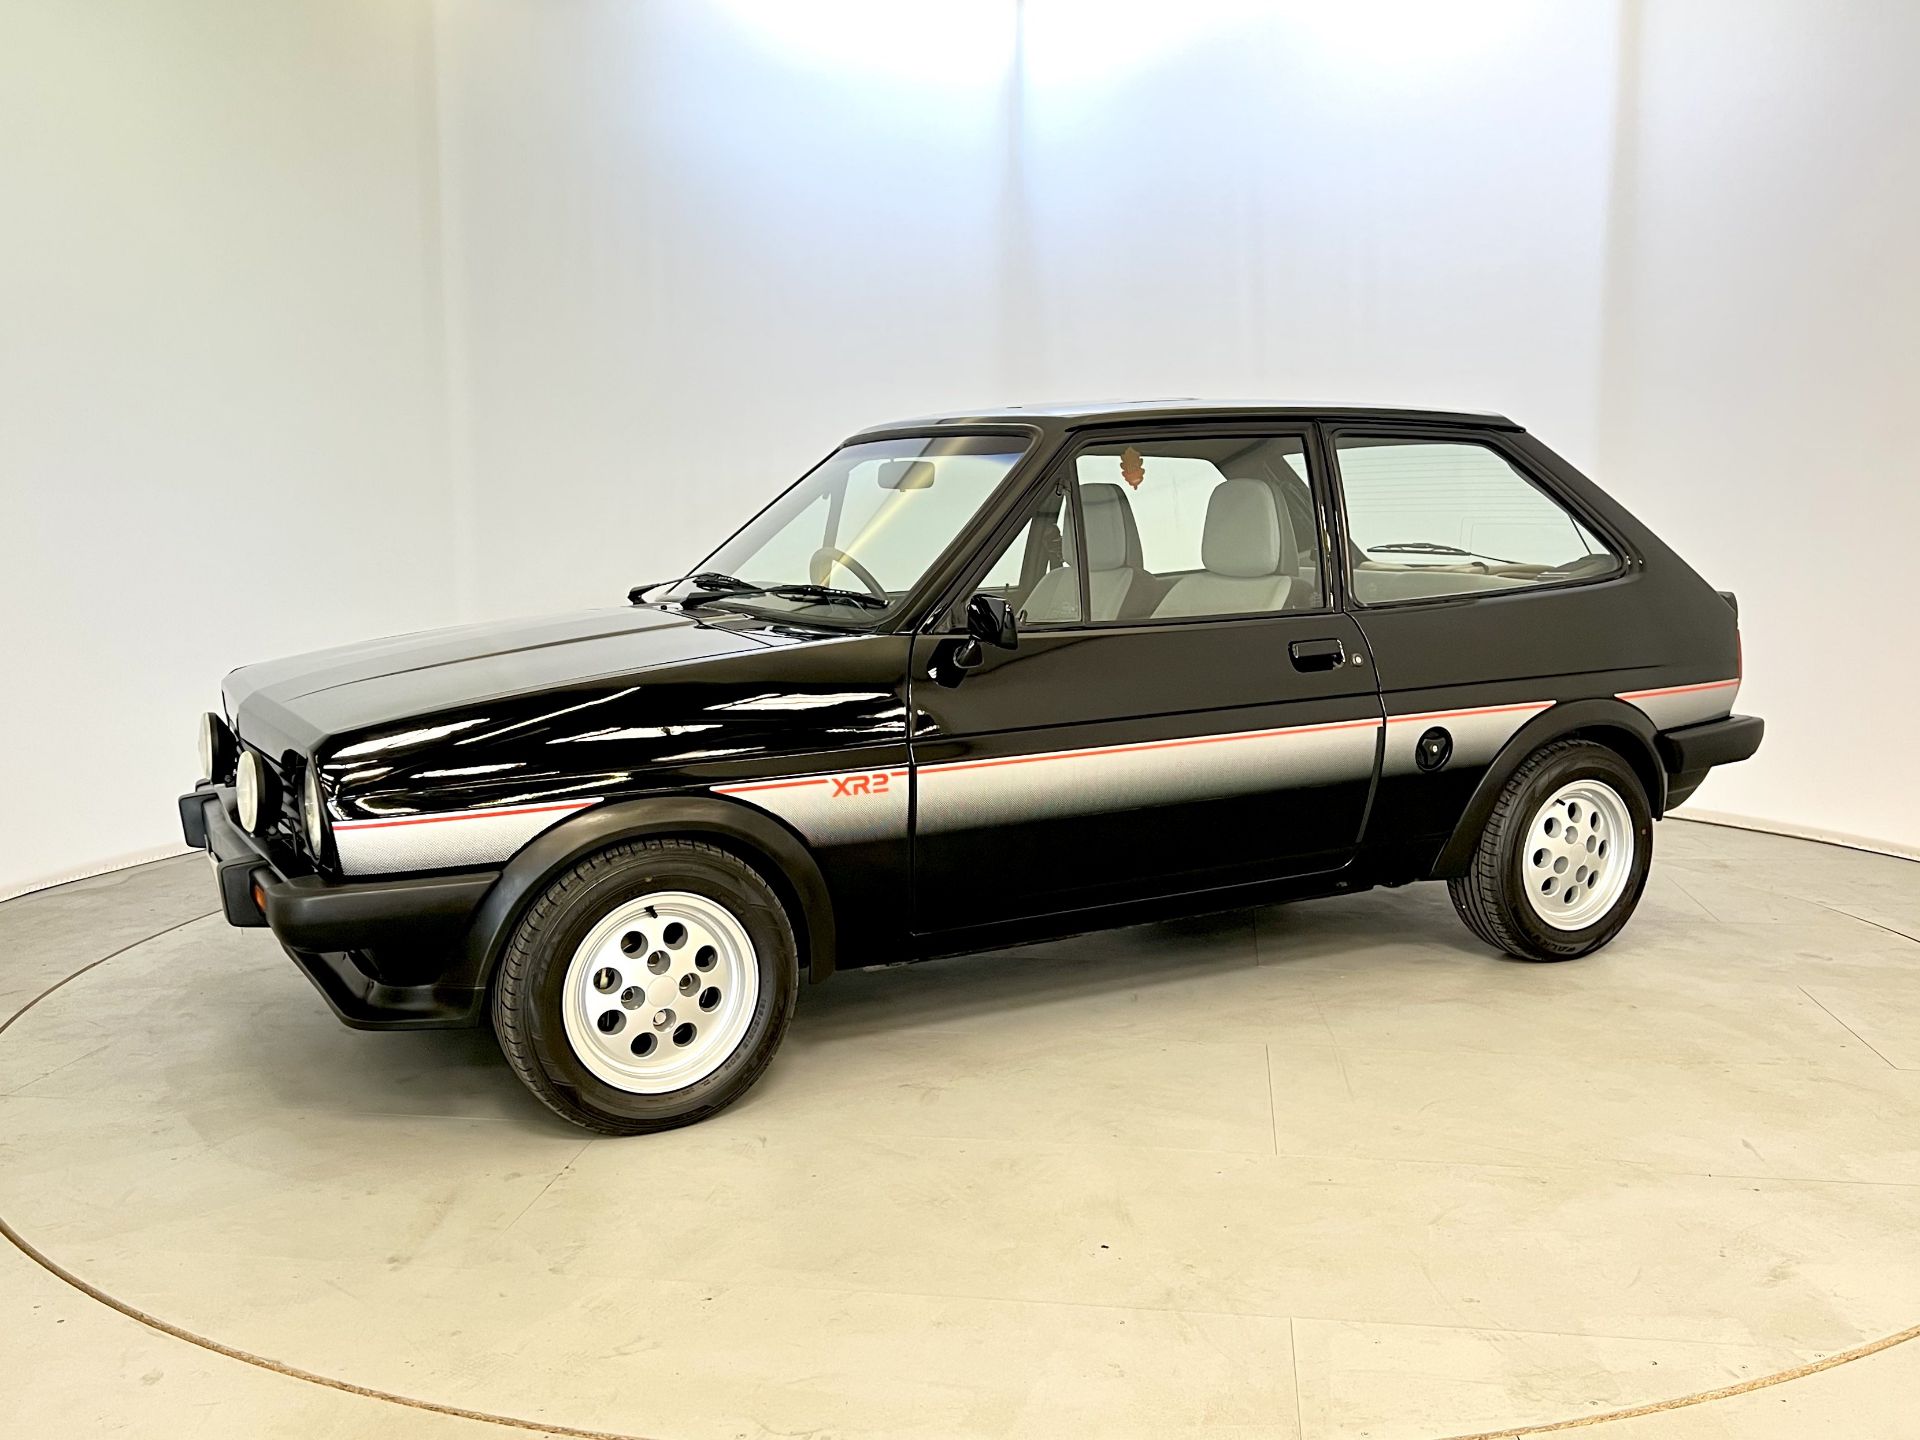 Ford Fiesta XR2 - Image 4 of 33